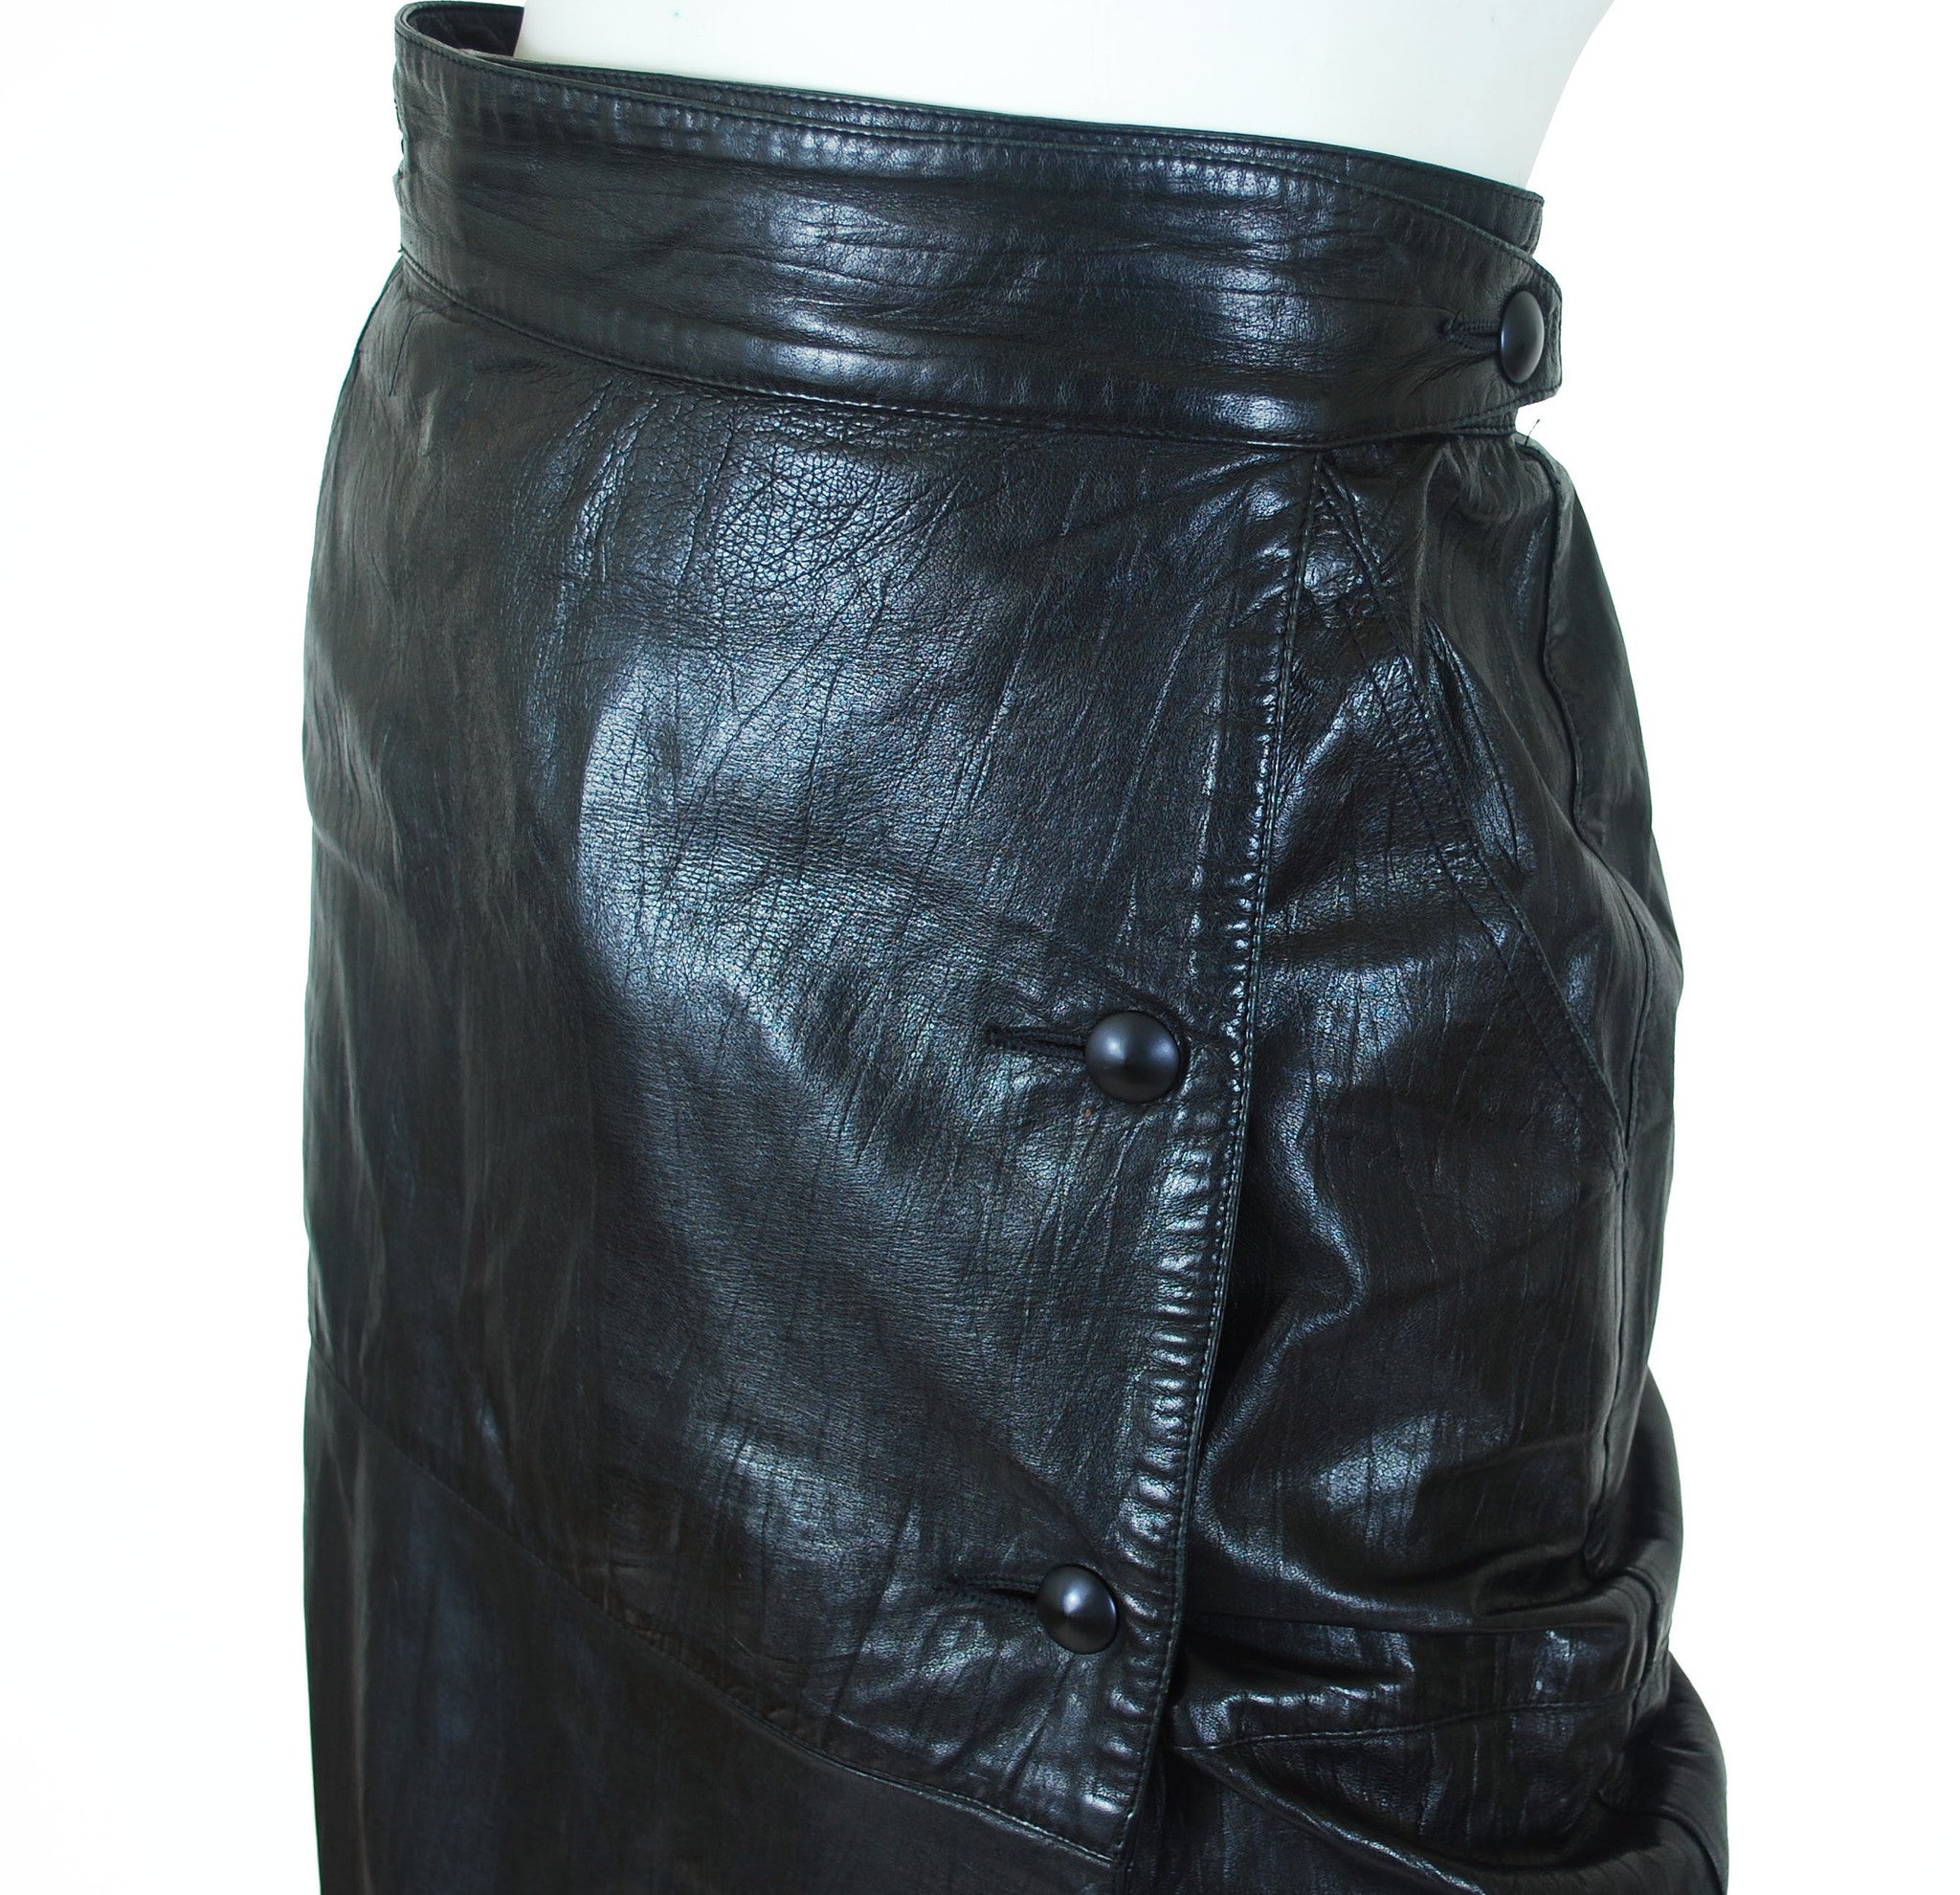 1980s Black Leather Cowhide Wrap Skirt